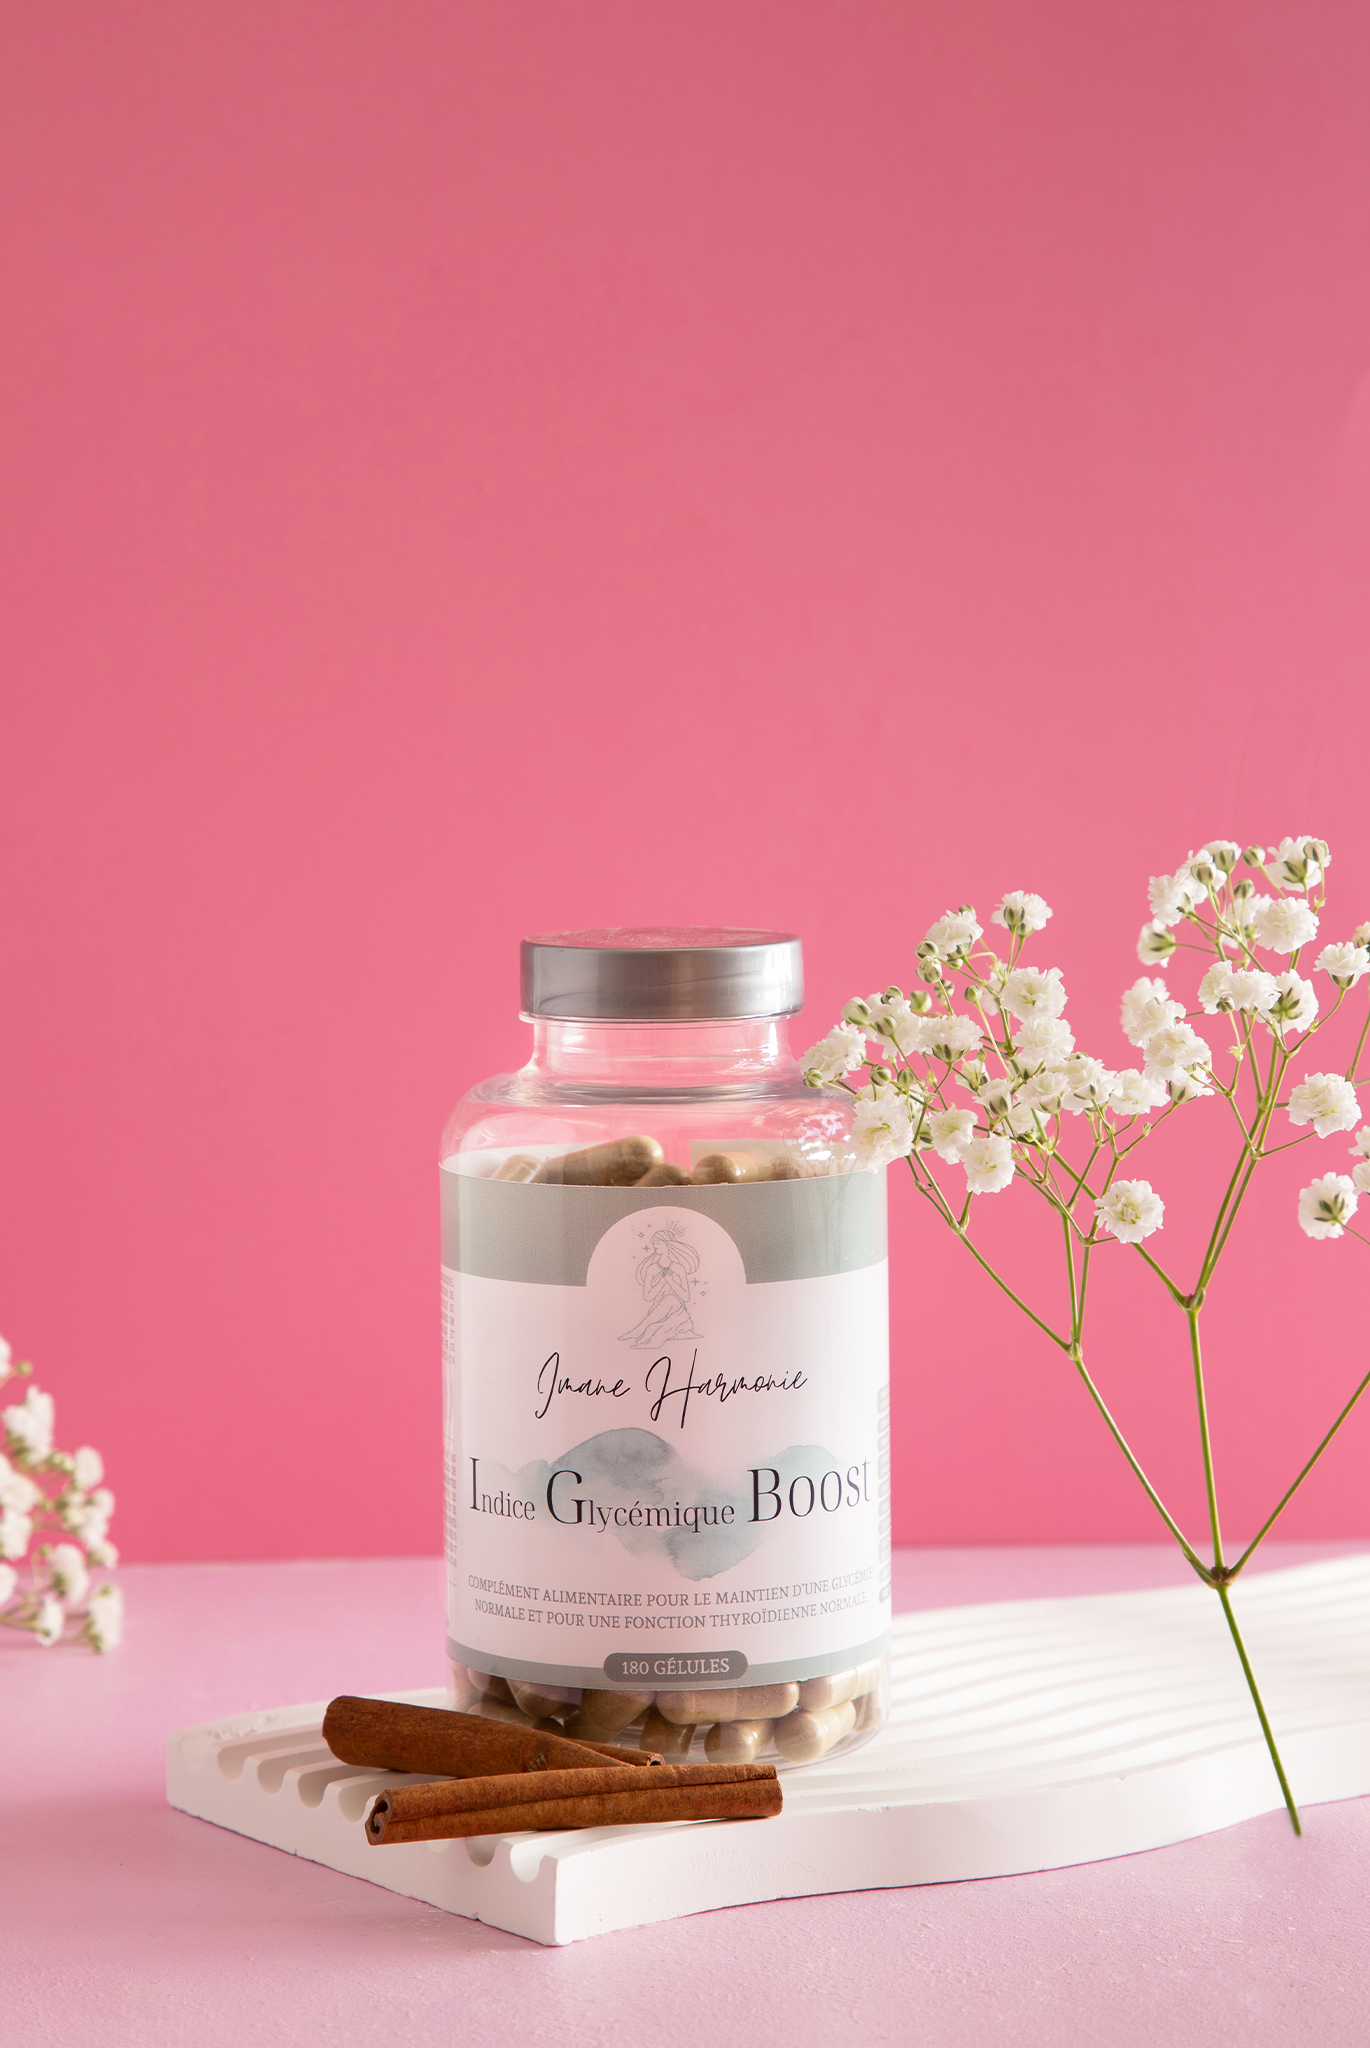 Glycemic index boost supplement with a pink background